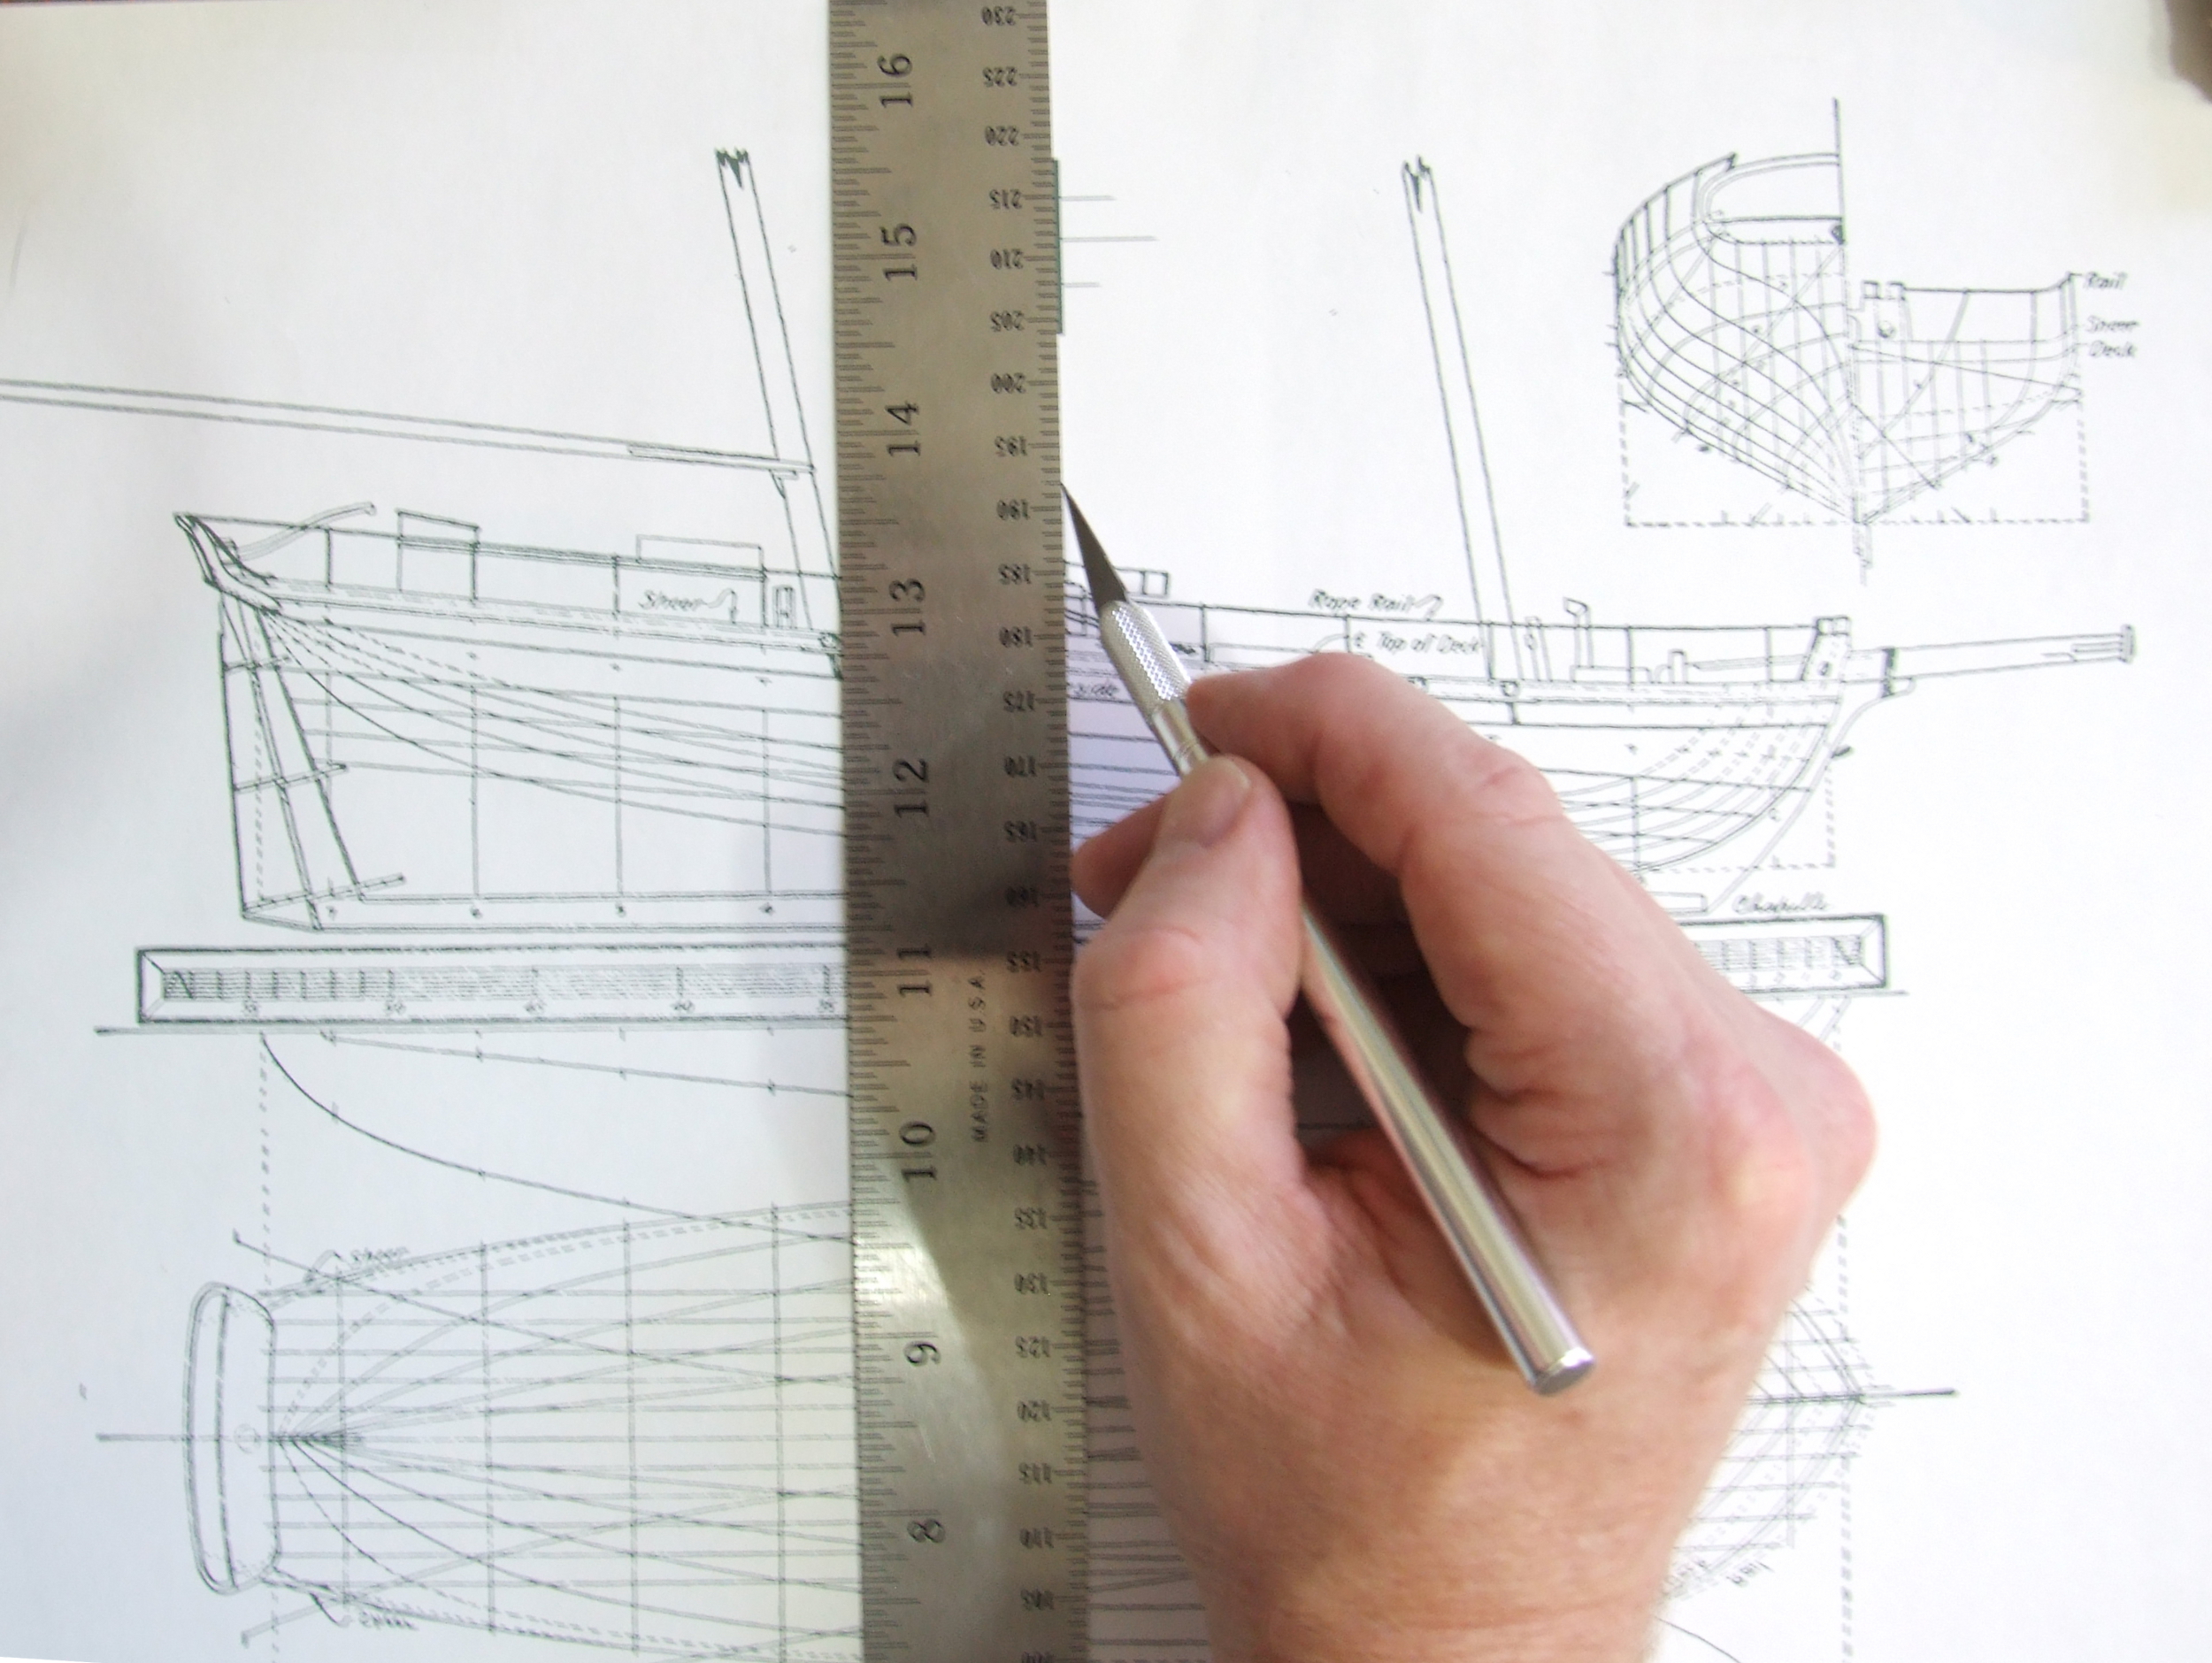 Building a Ship Model Made of Wood (Part I): Choice of the